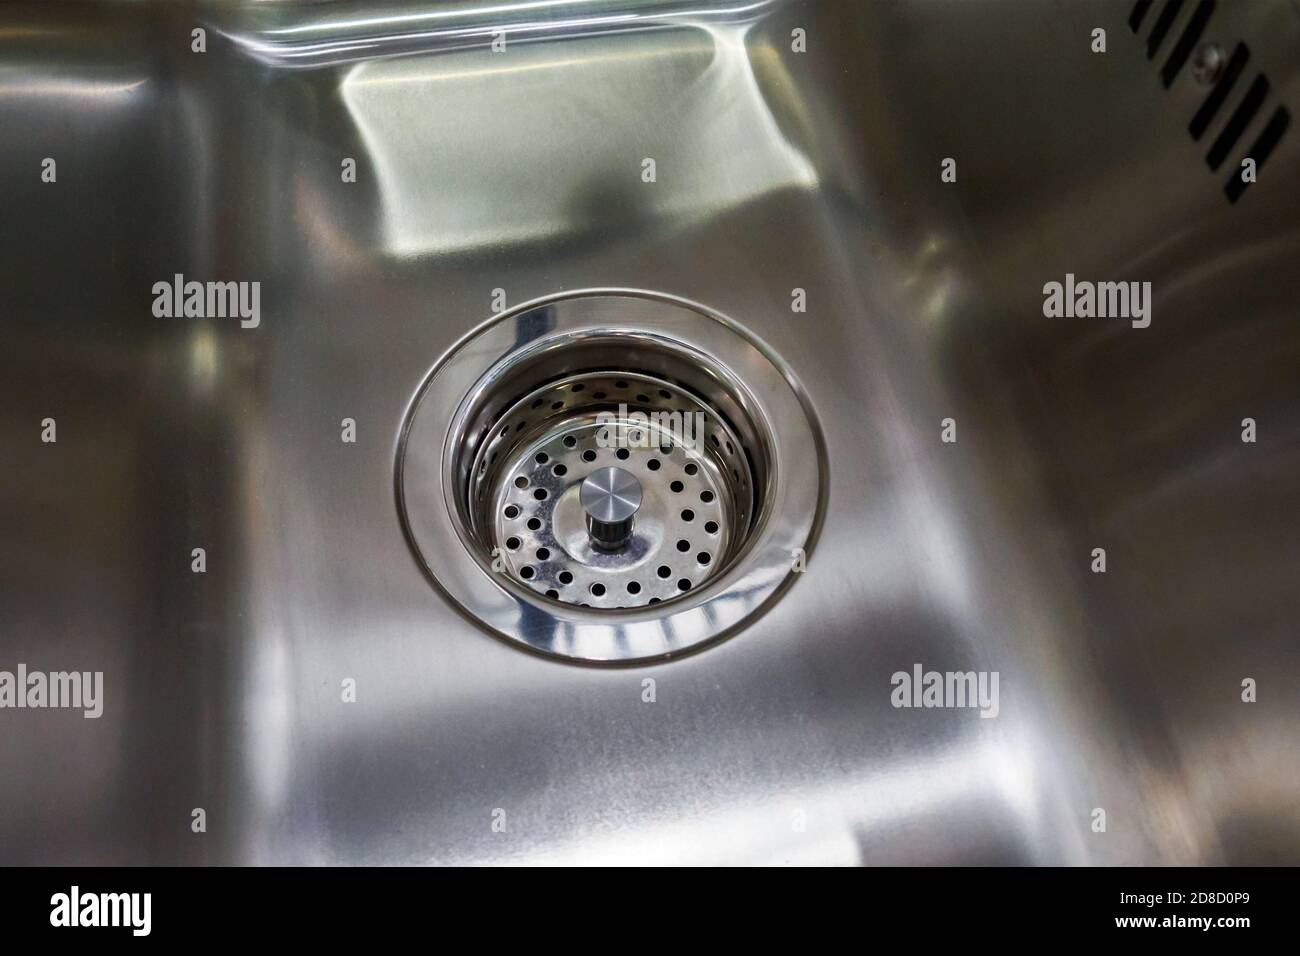 empty and dry metal kitchen sink with grill on drain Stock Photo